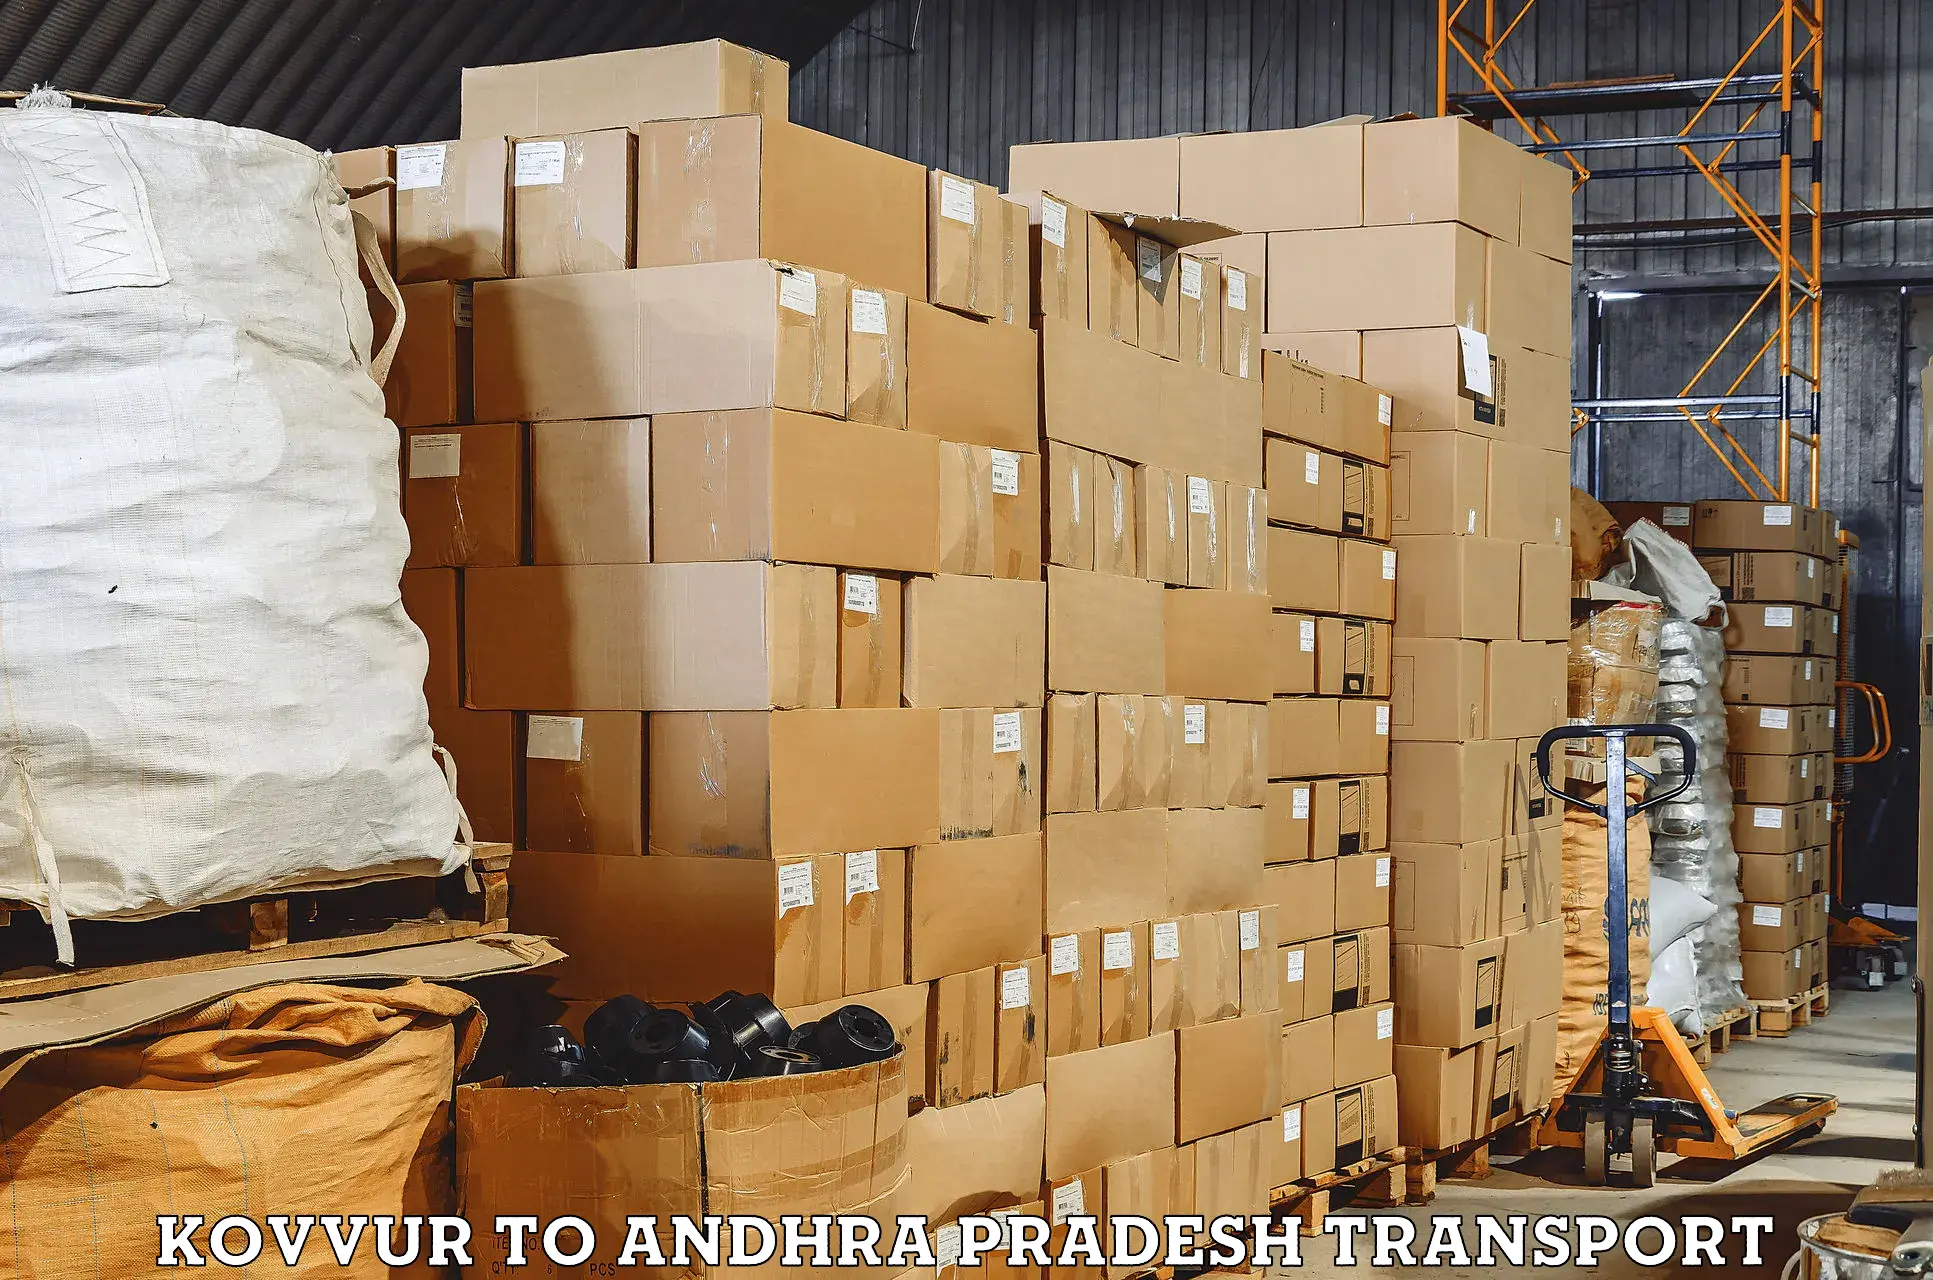 Part load transport service in India Kovvur to Gullapalli